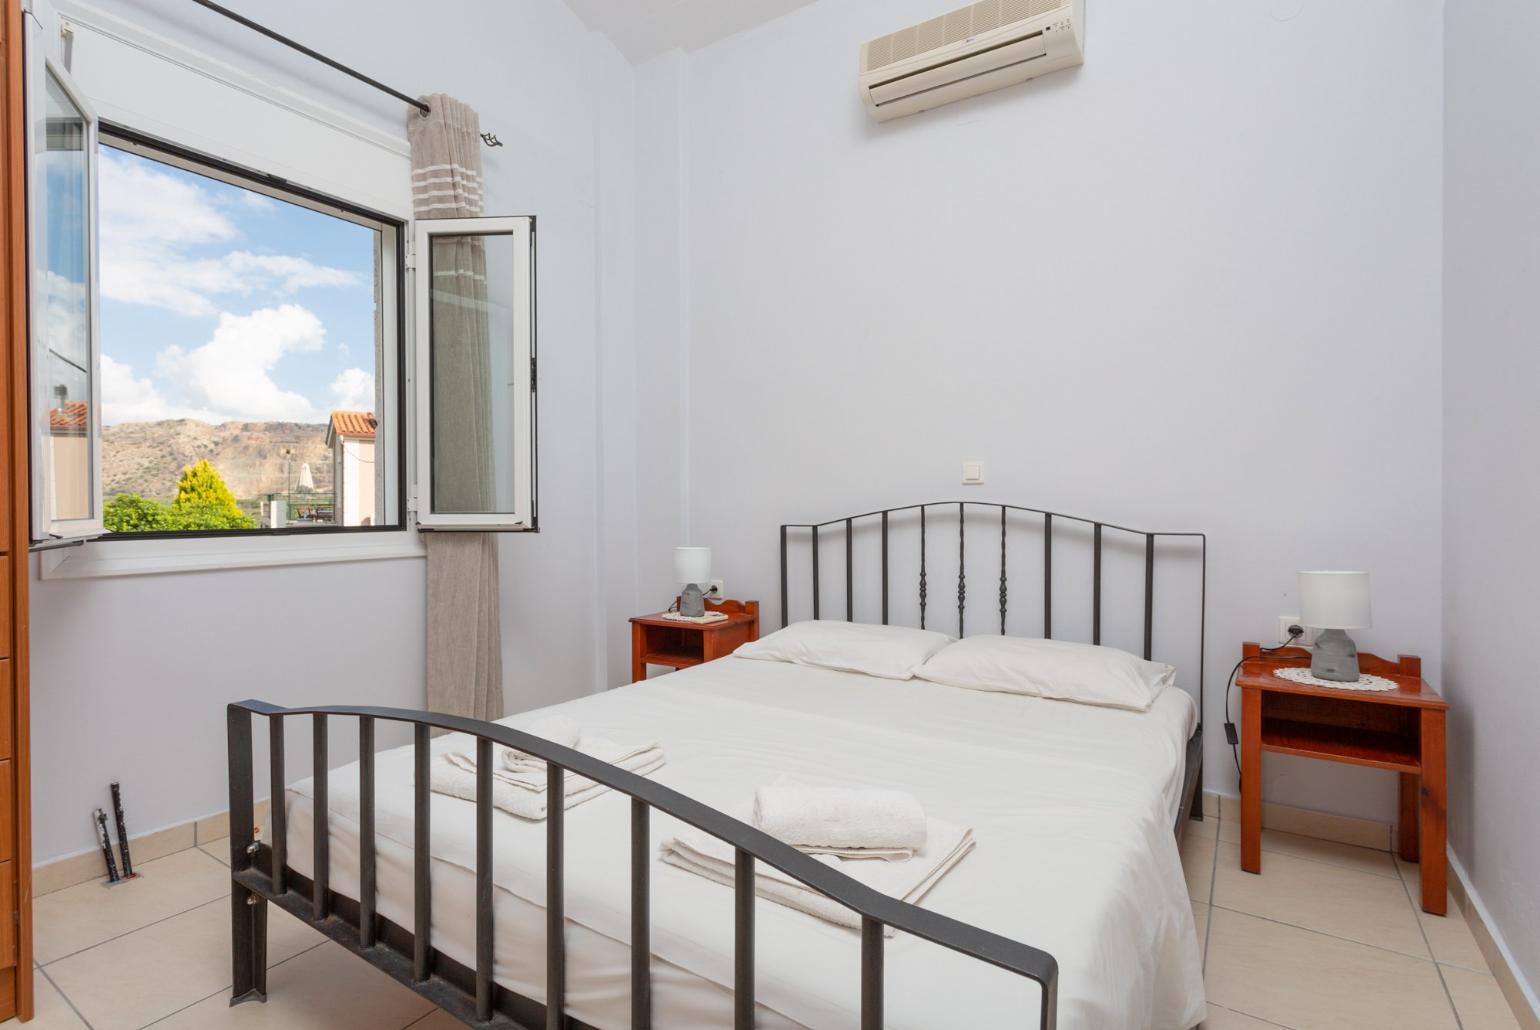 Double bedroom with A/C and balcony access